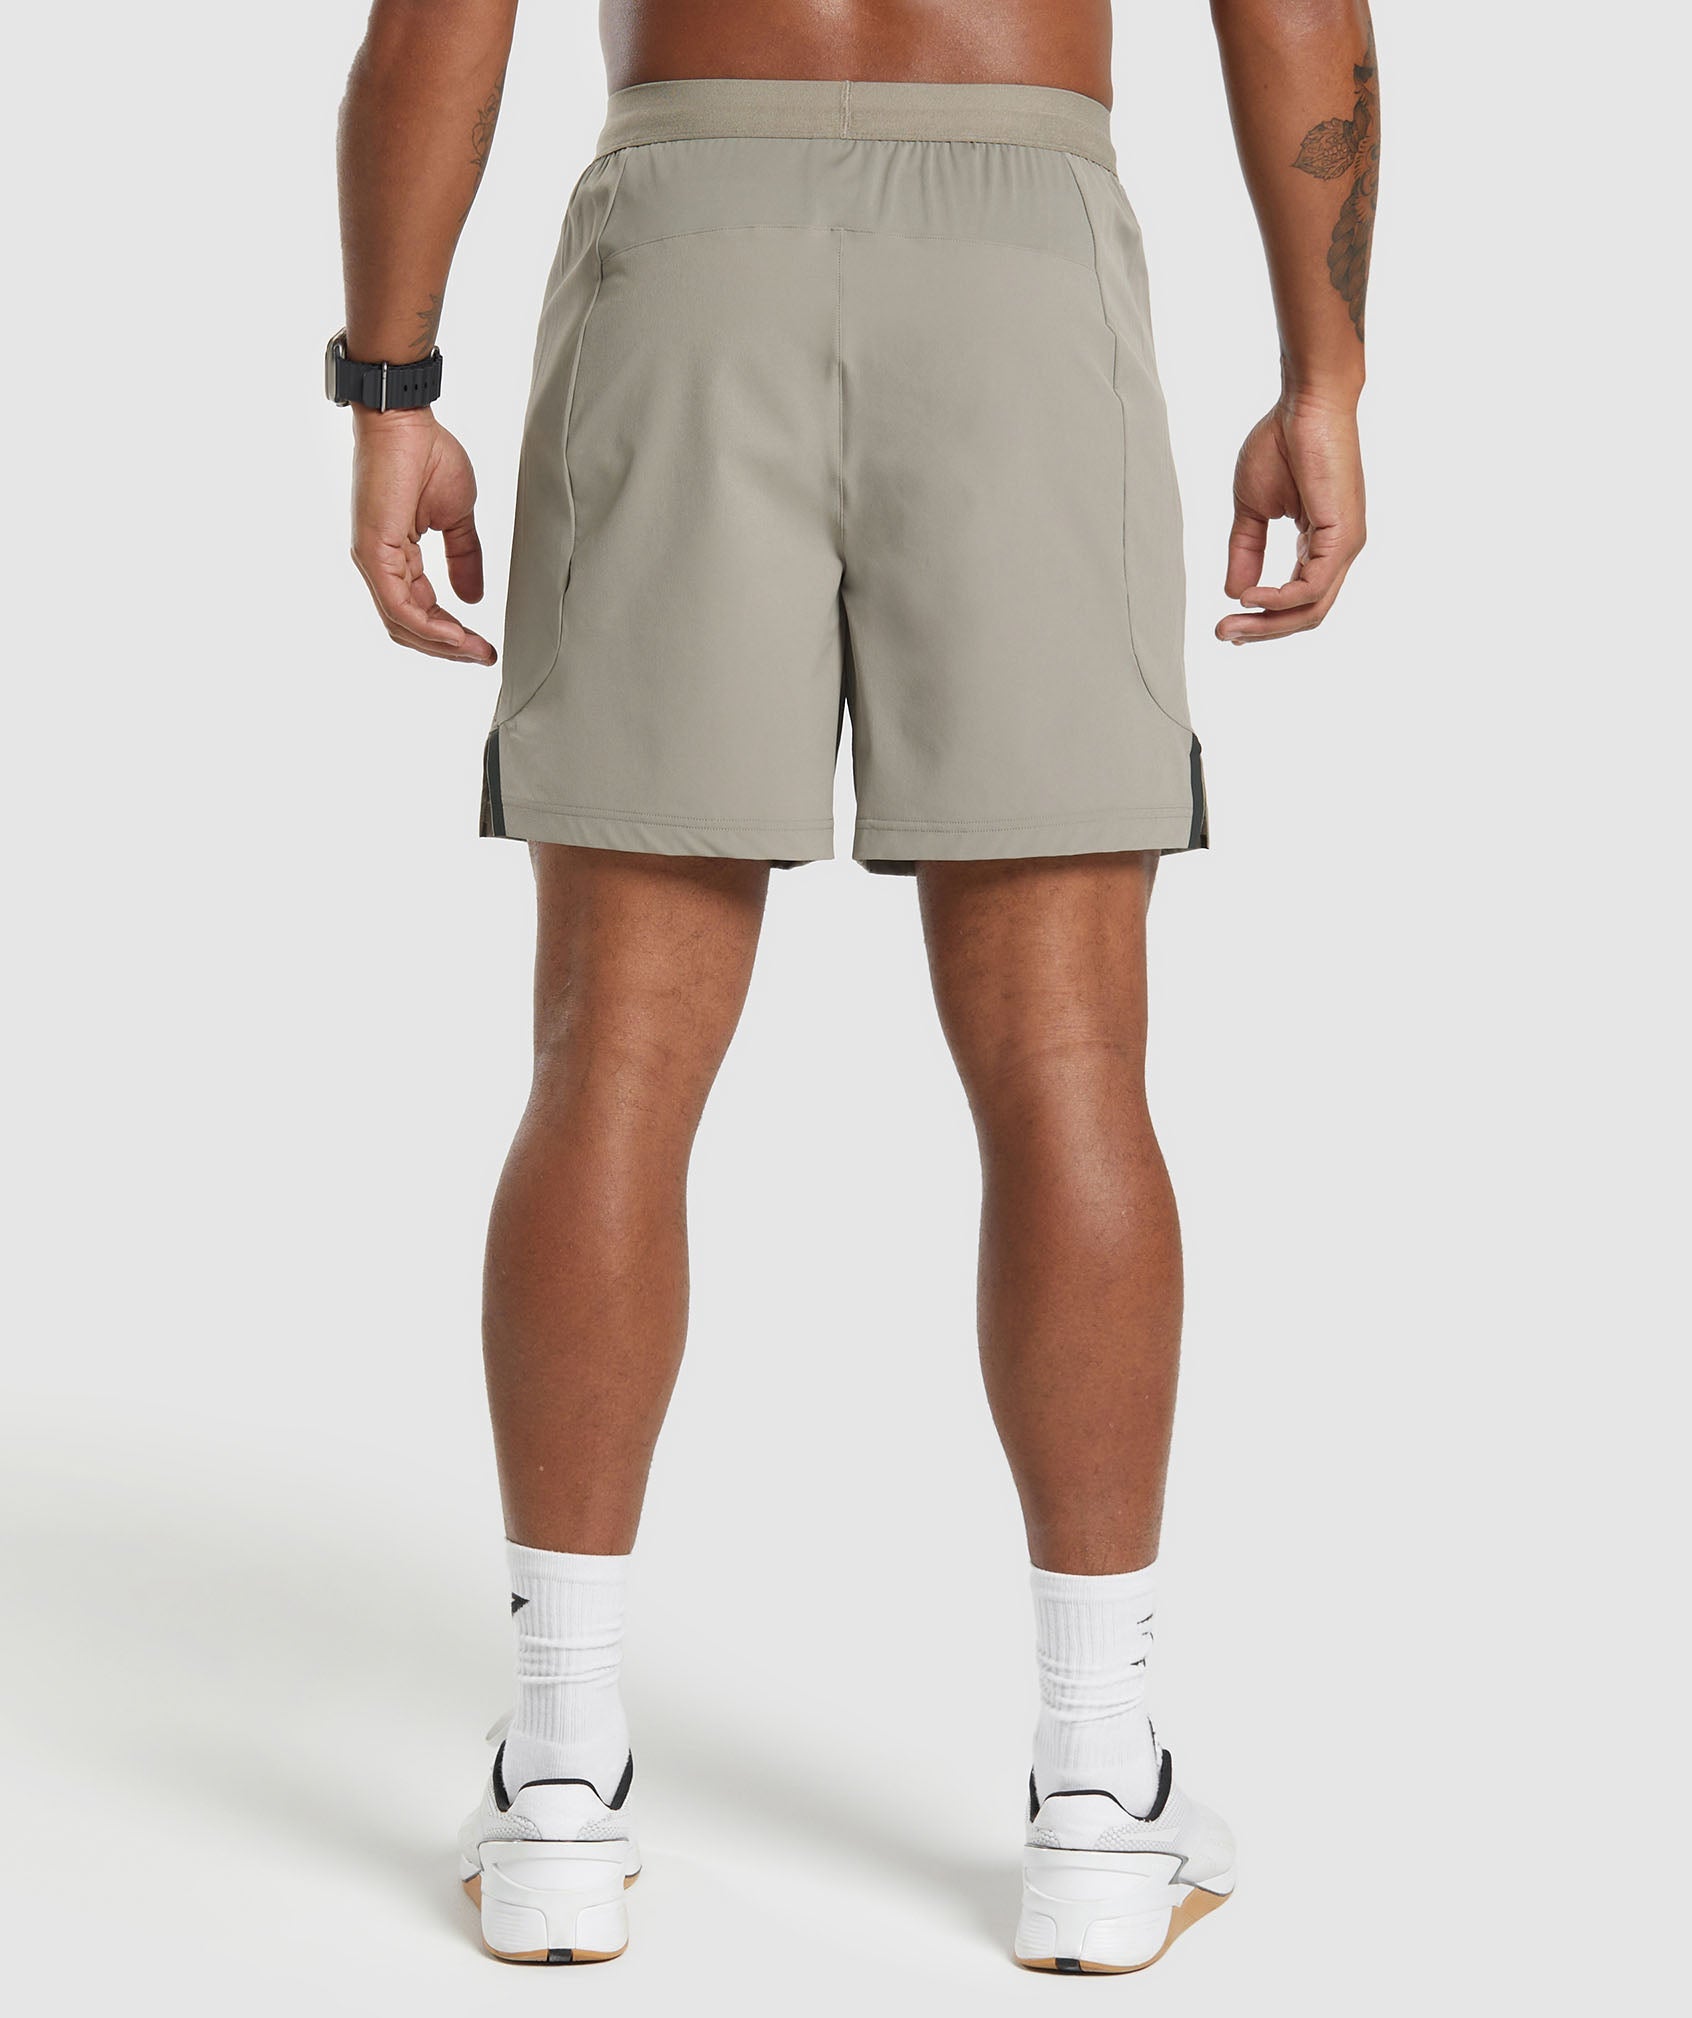 Apex 7" Hybrid Shorts in Linen Brown - view 2